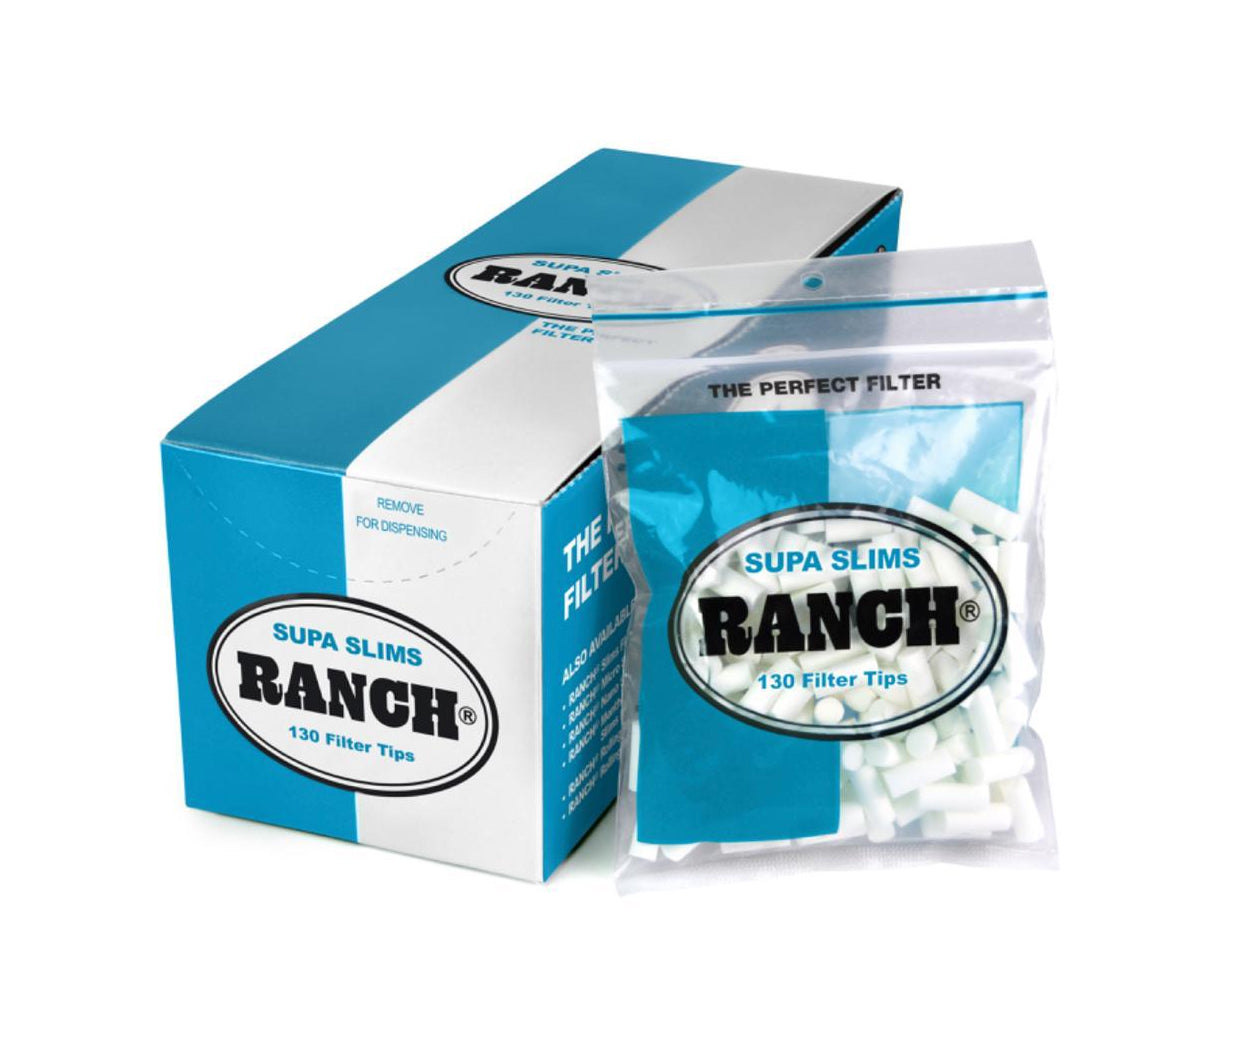 Ranch Filters Supa Slim Blue (Box of 12) - 20 Boxes